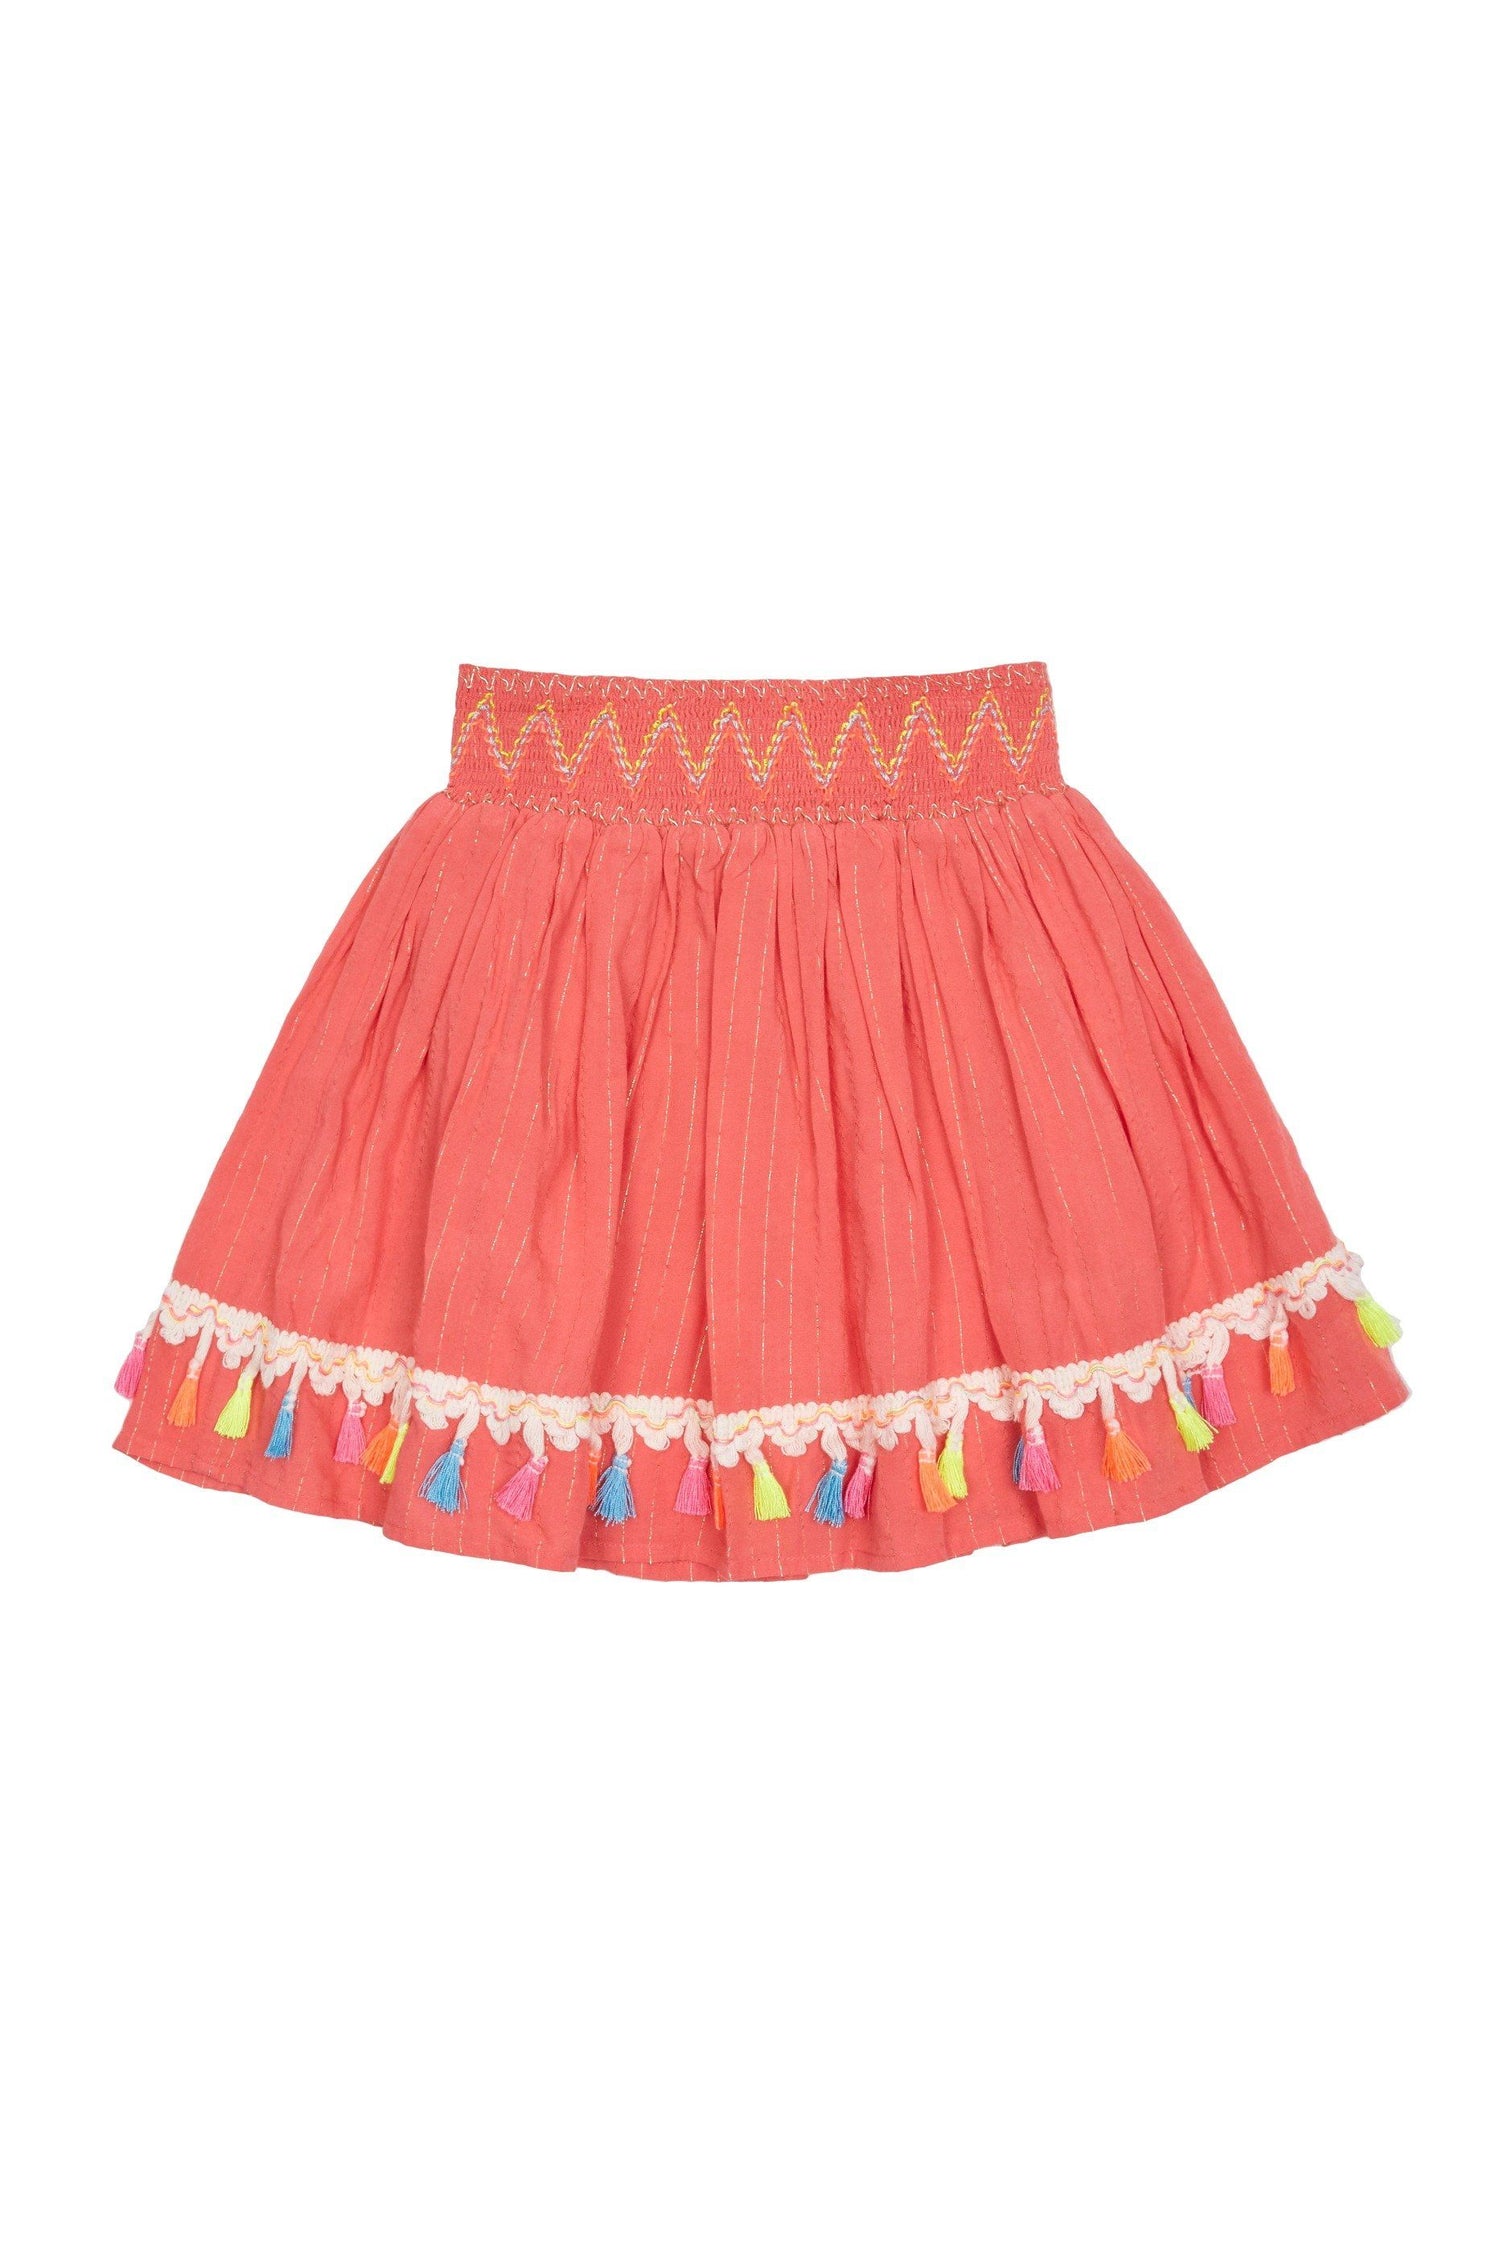 Coral-colored skirt with metallic thread stripes, zig-zag stitching on waist, and embroidered fringe trim along bottom hem. 